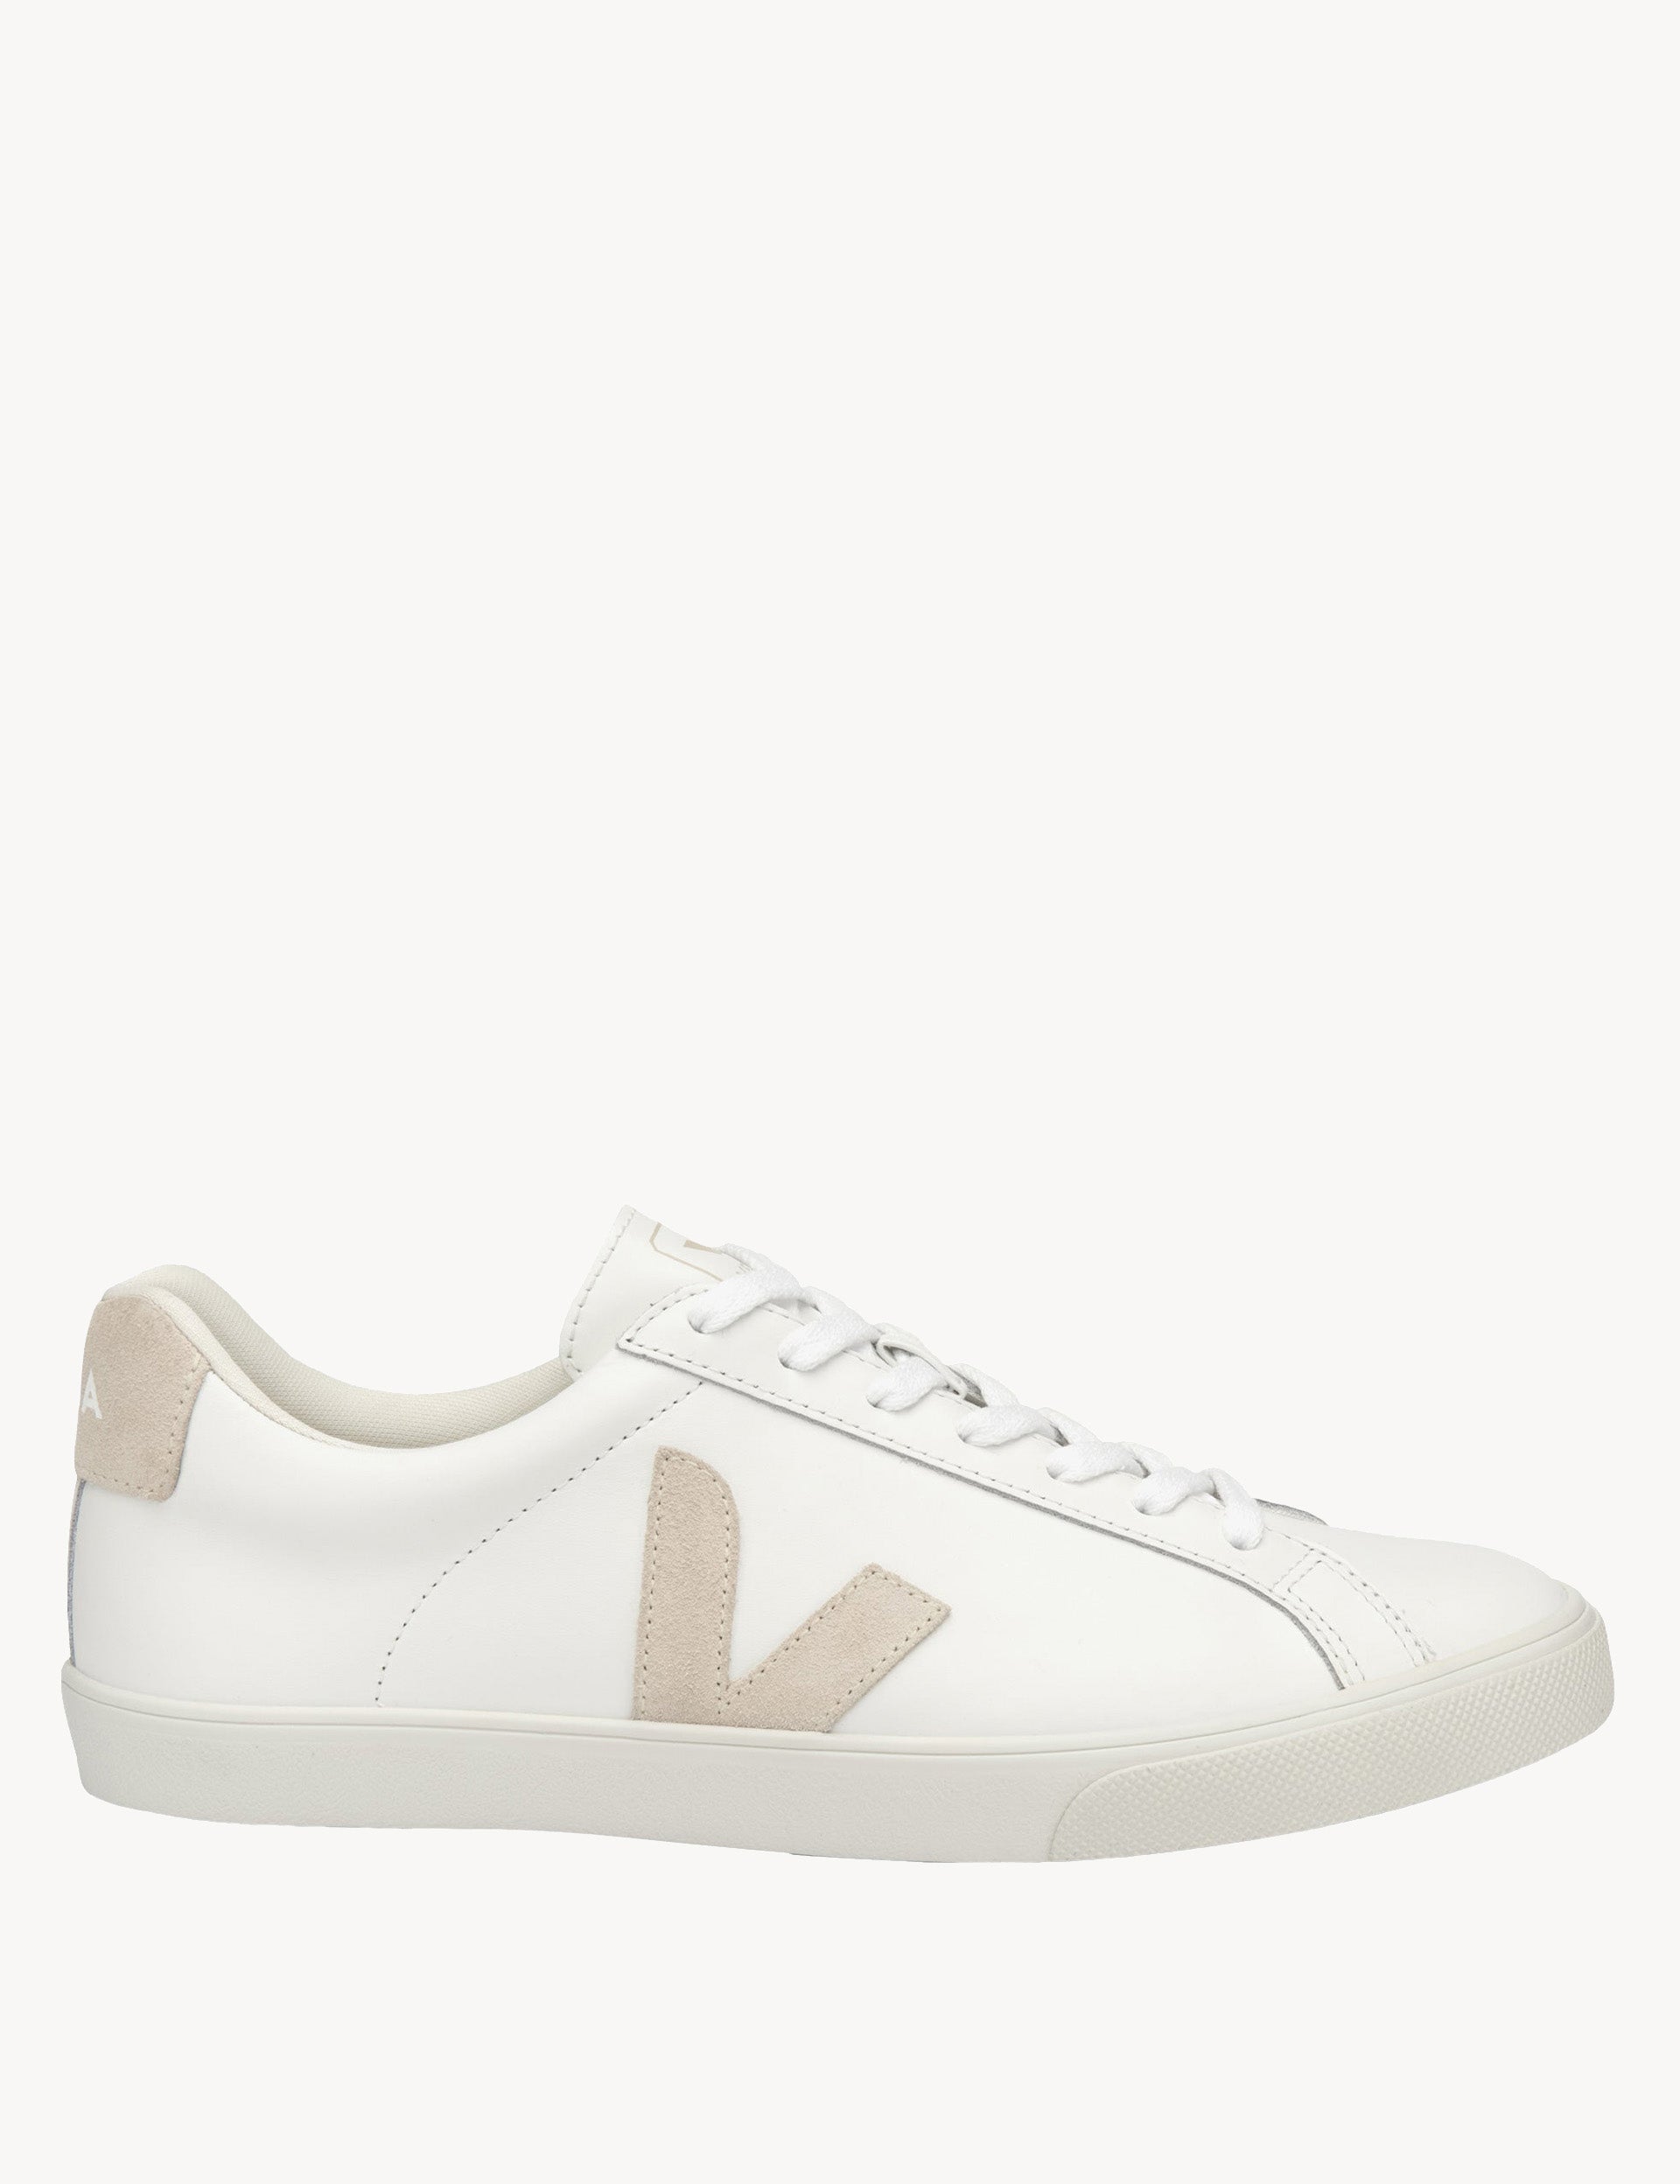 Veja | Esplar Leather Trainers - Extra-White Sable | The Sports Edit